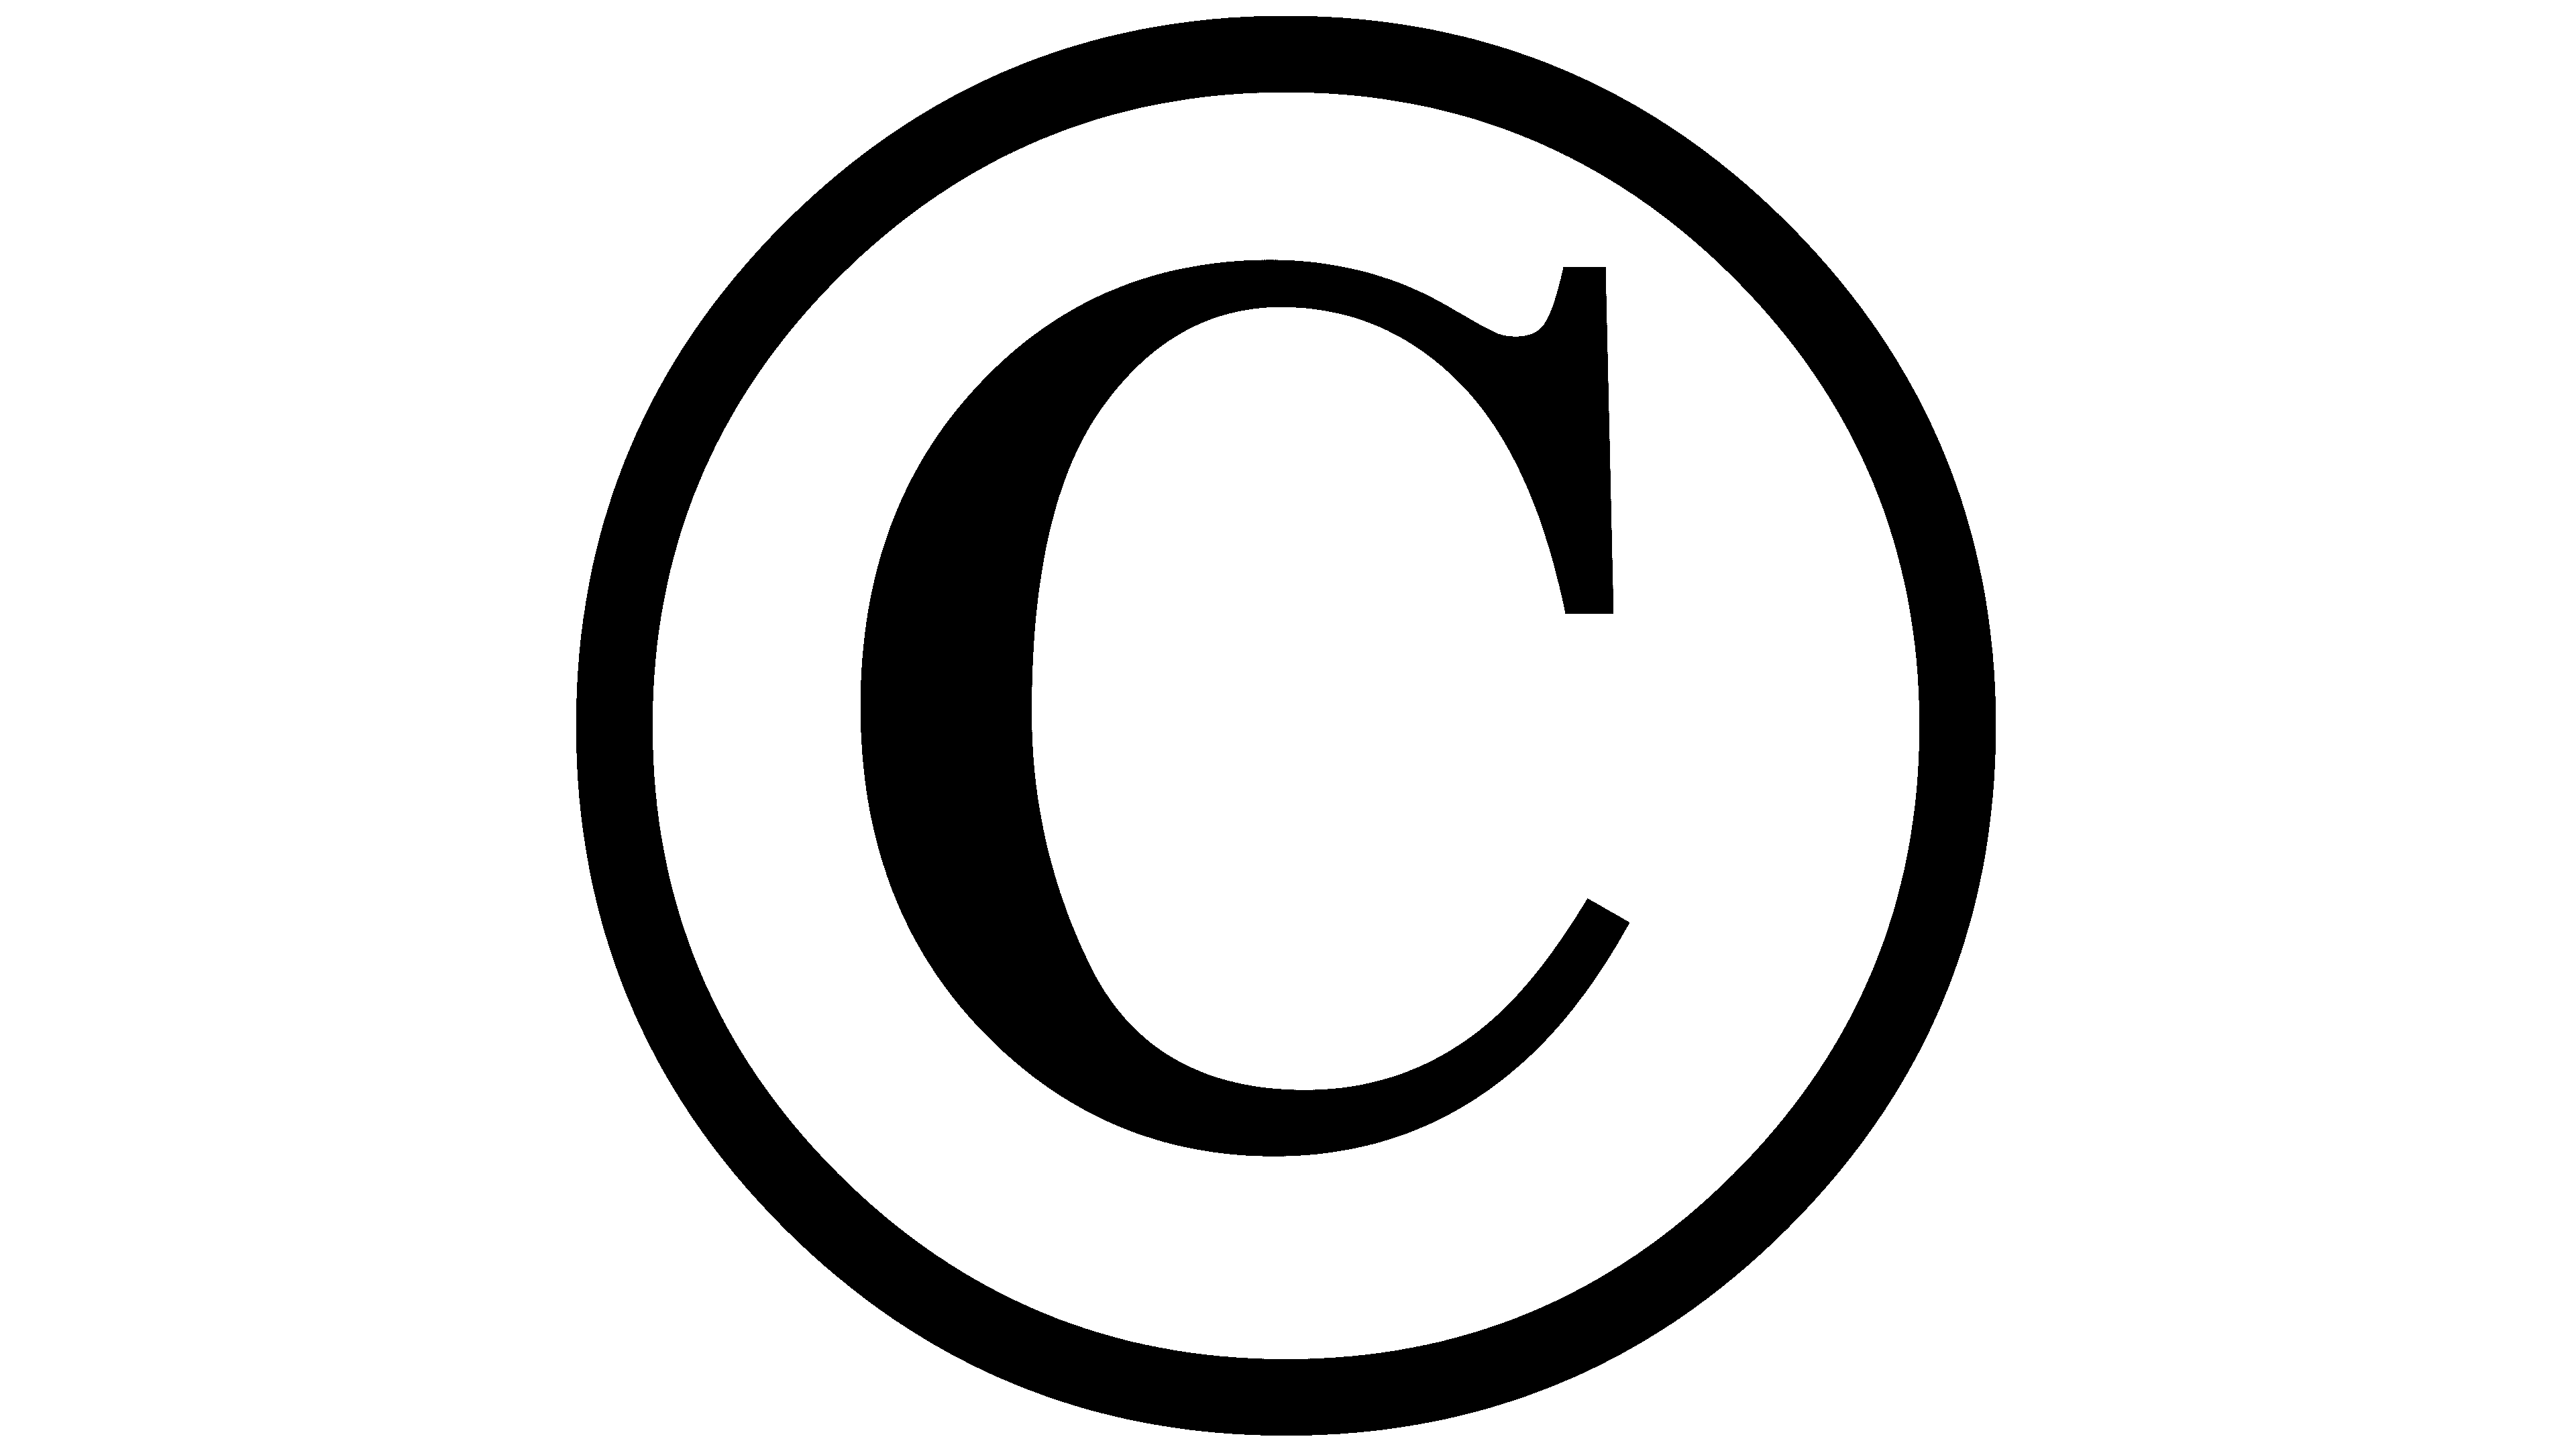 copyright-logo-symbol-meaning-history-png-brand